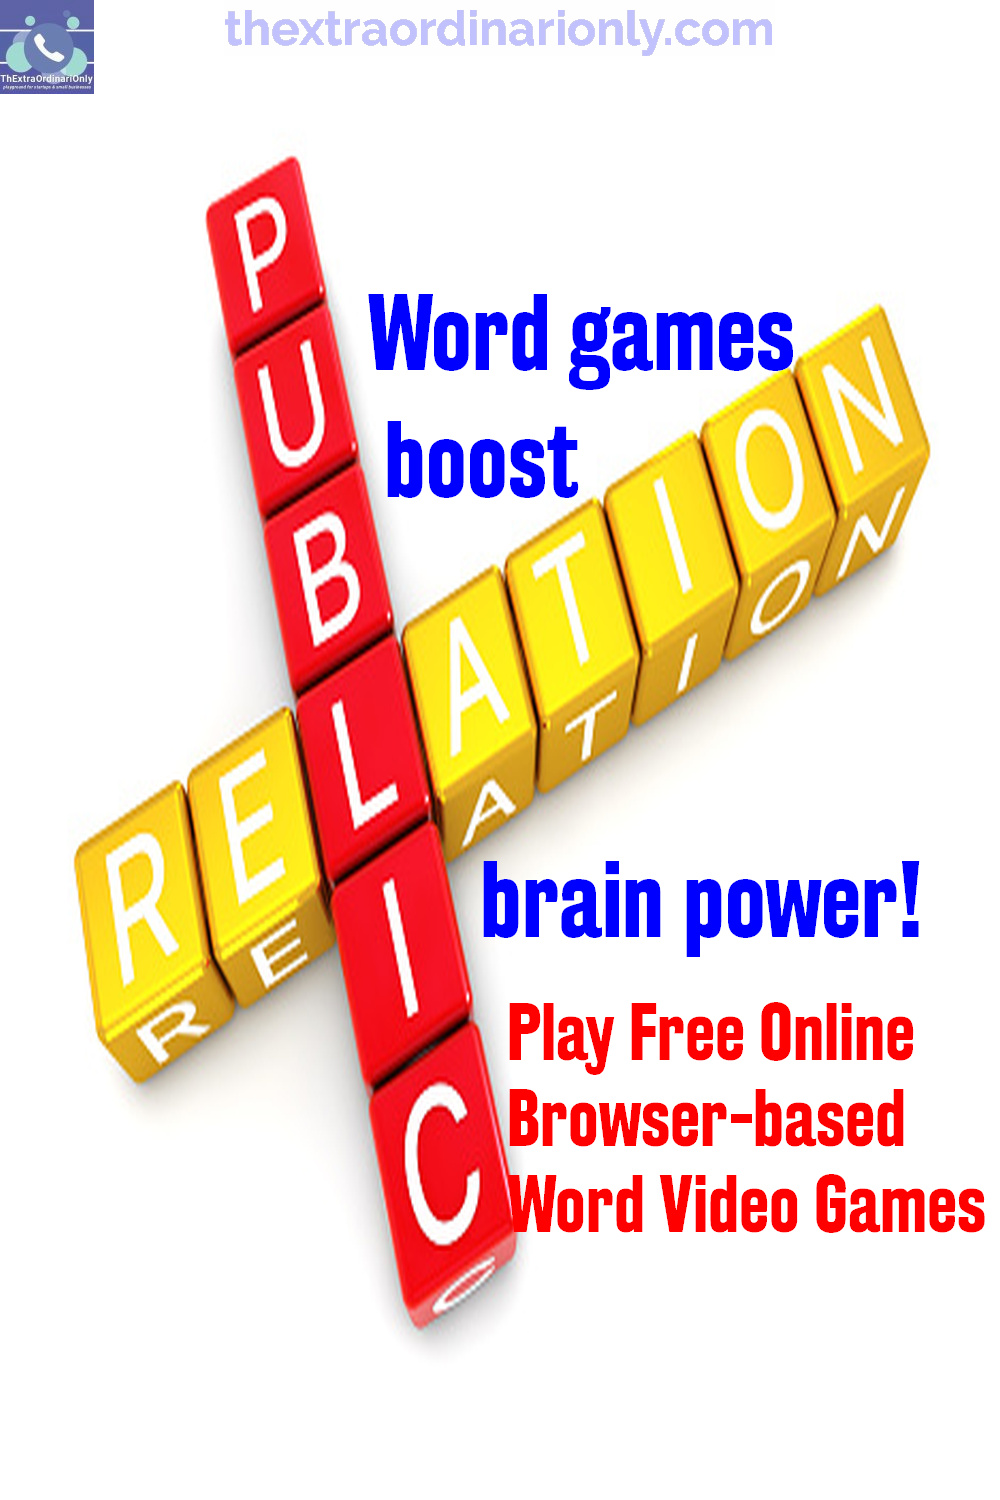 Play Free Online Browser-Based Word Video Games